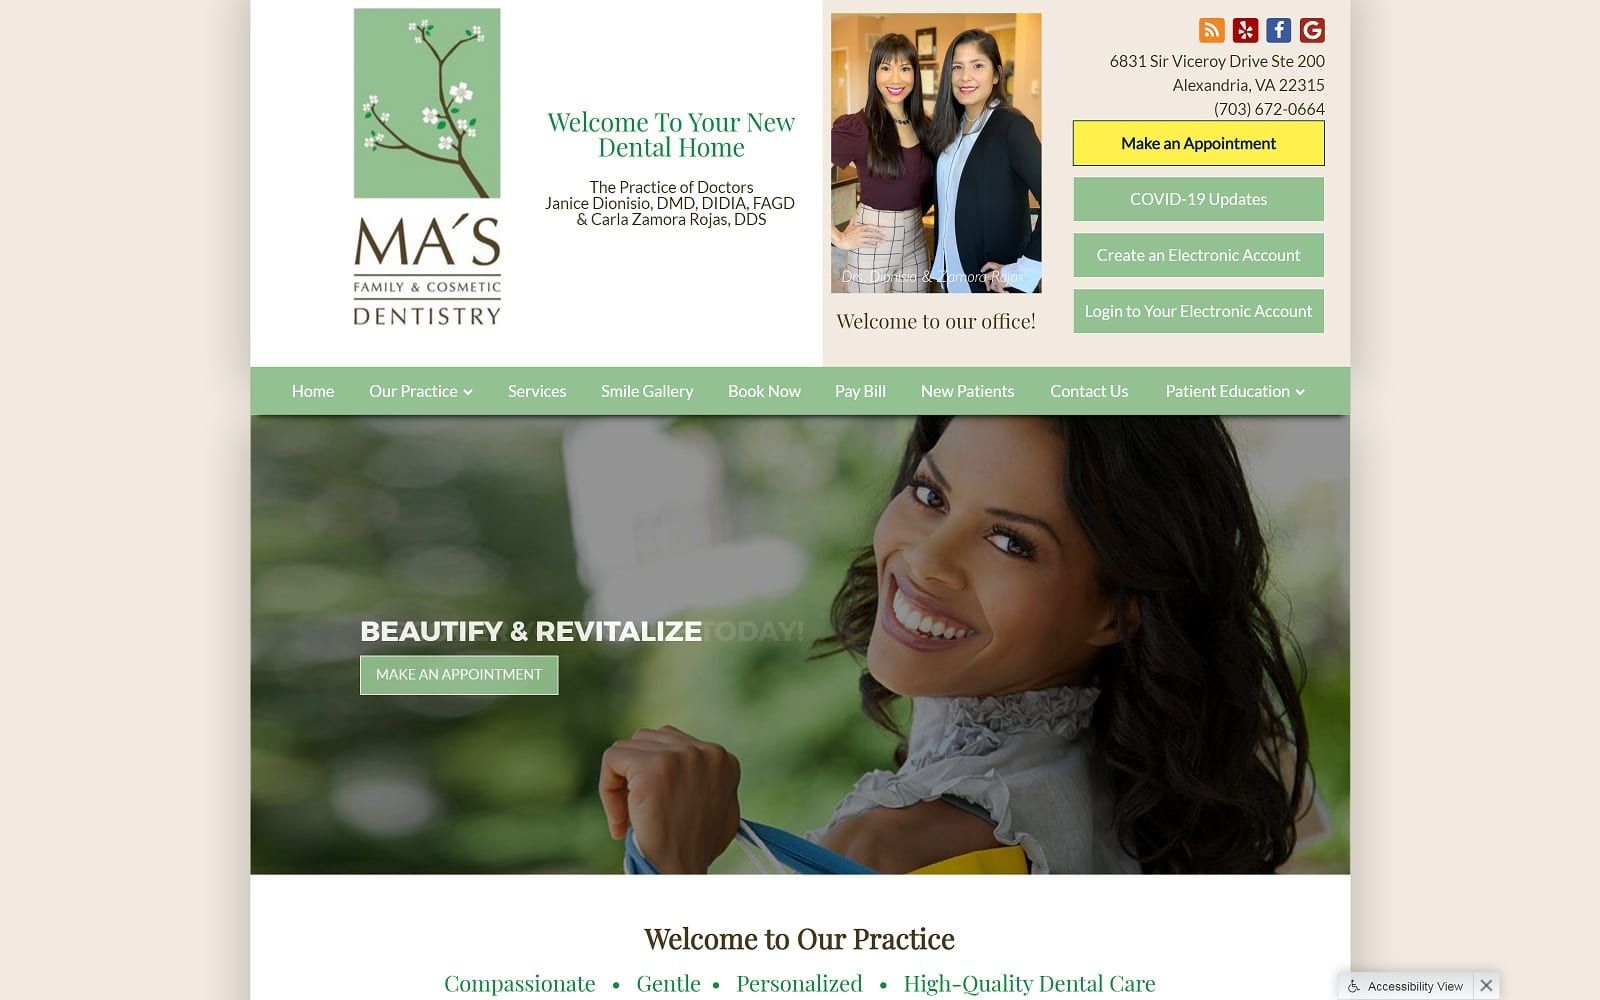 The screenshot of ma's family & cosmetic dentistry masfamilydentistry. Com dr. Janice dionisio website